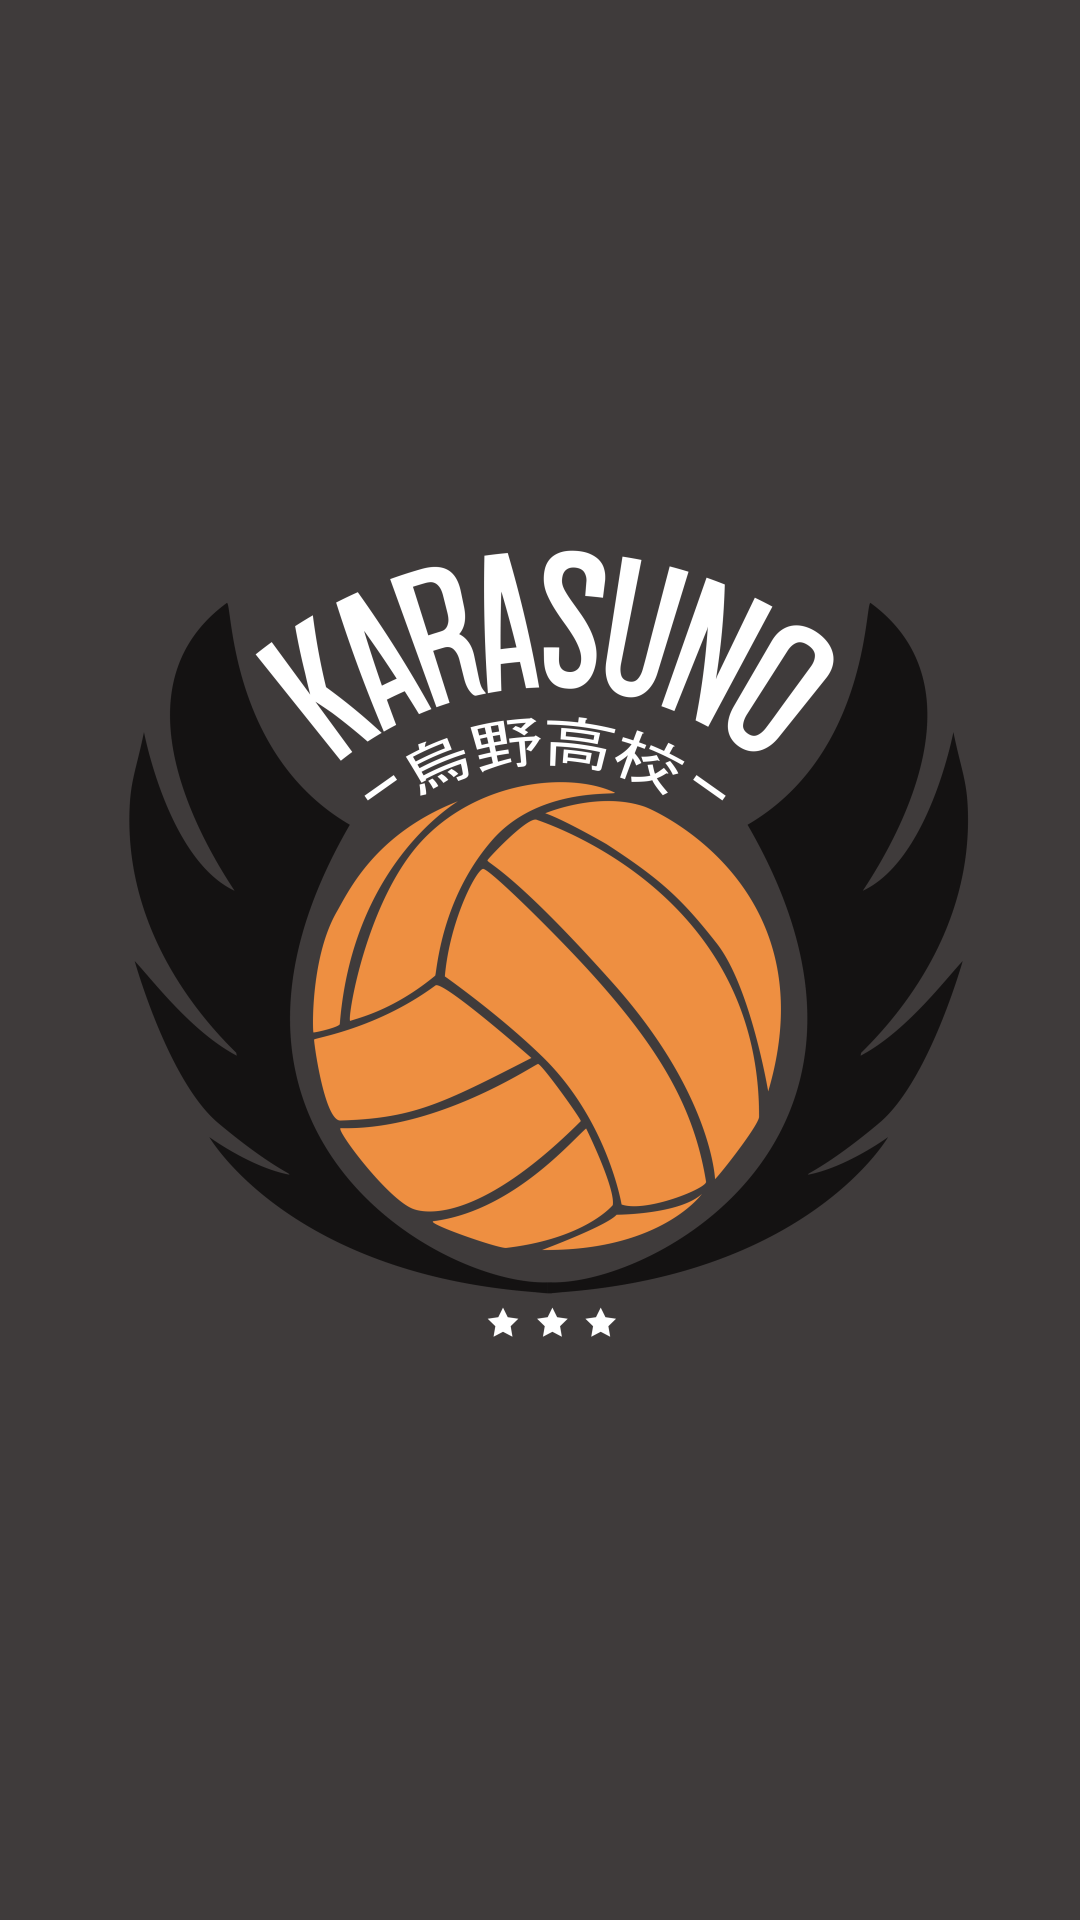 Karasuno Wallpaper For Your Phone This Is Also Available